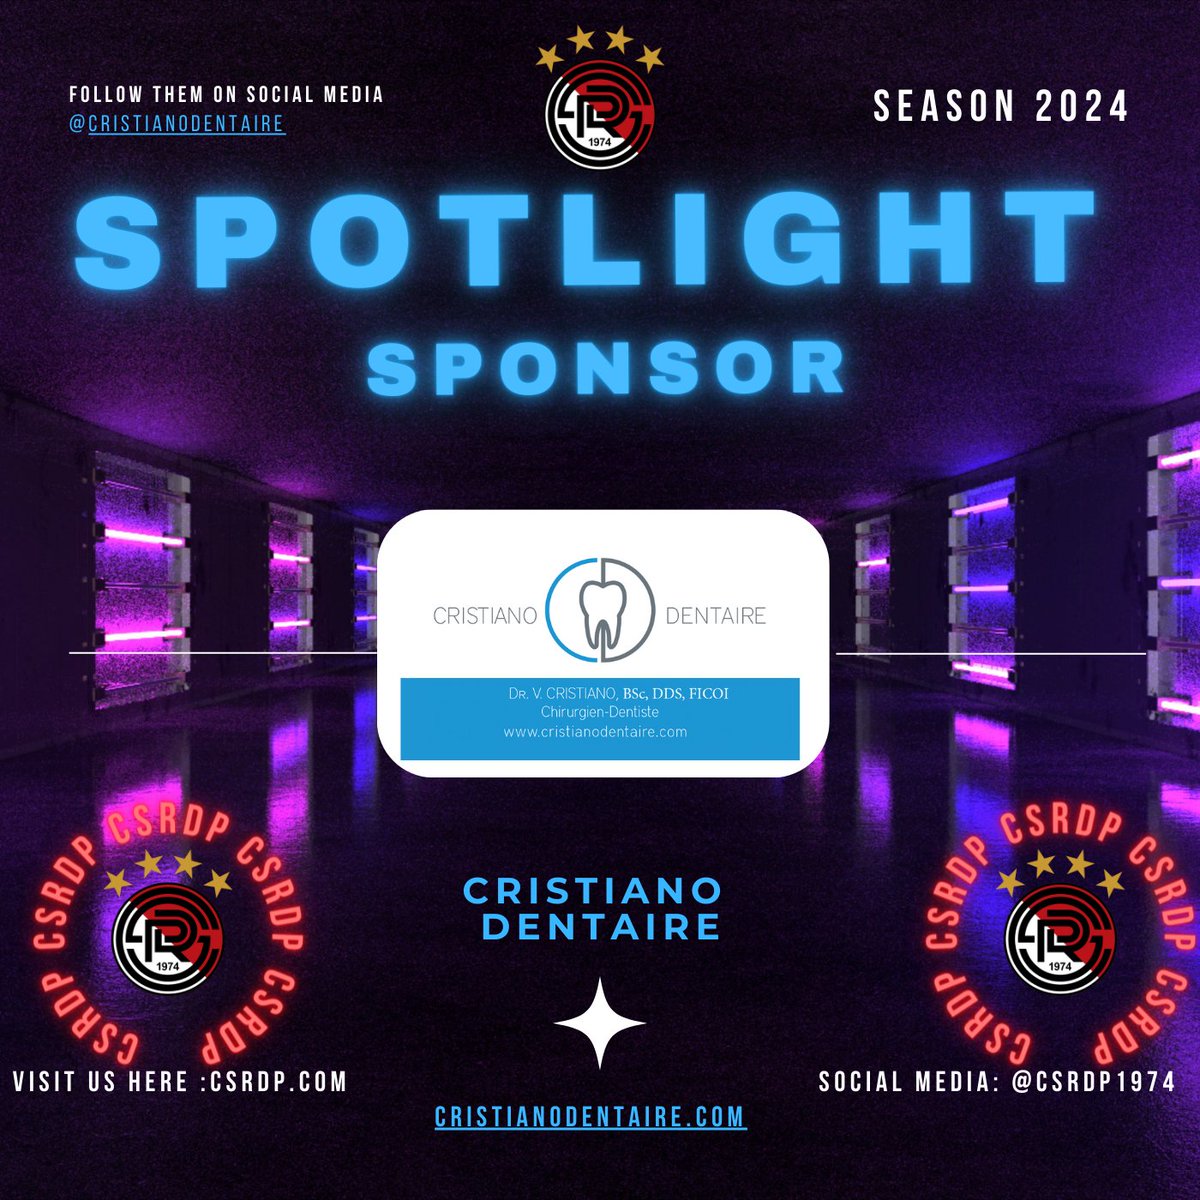 We would like to highlight & thank our various sponsors. The local soccer community thanks you
#SponsorSpotlight #csrdp1974
This week it is Cristiano Dentaire you can access their website and follow them on social media.
#development #change